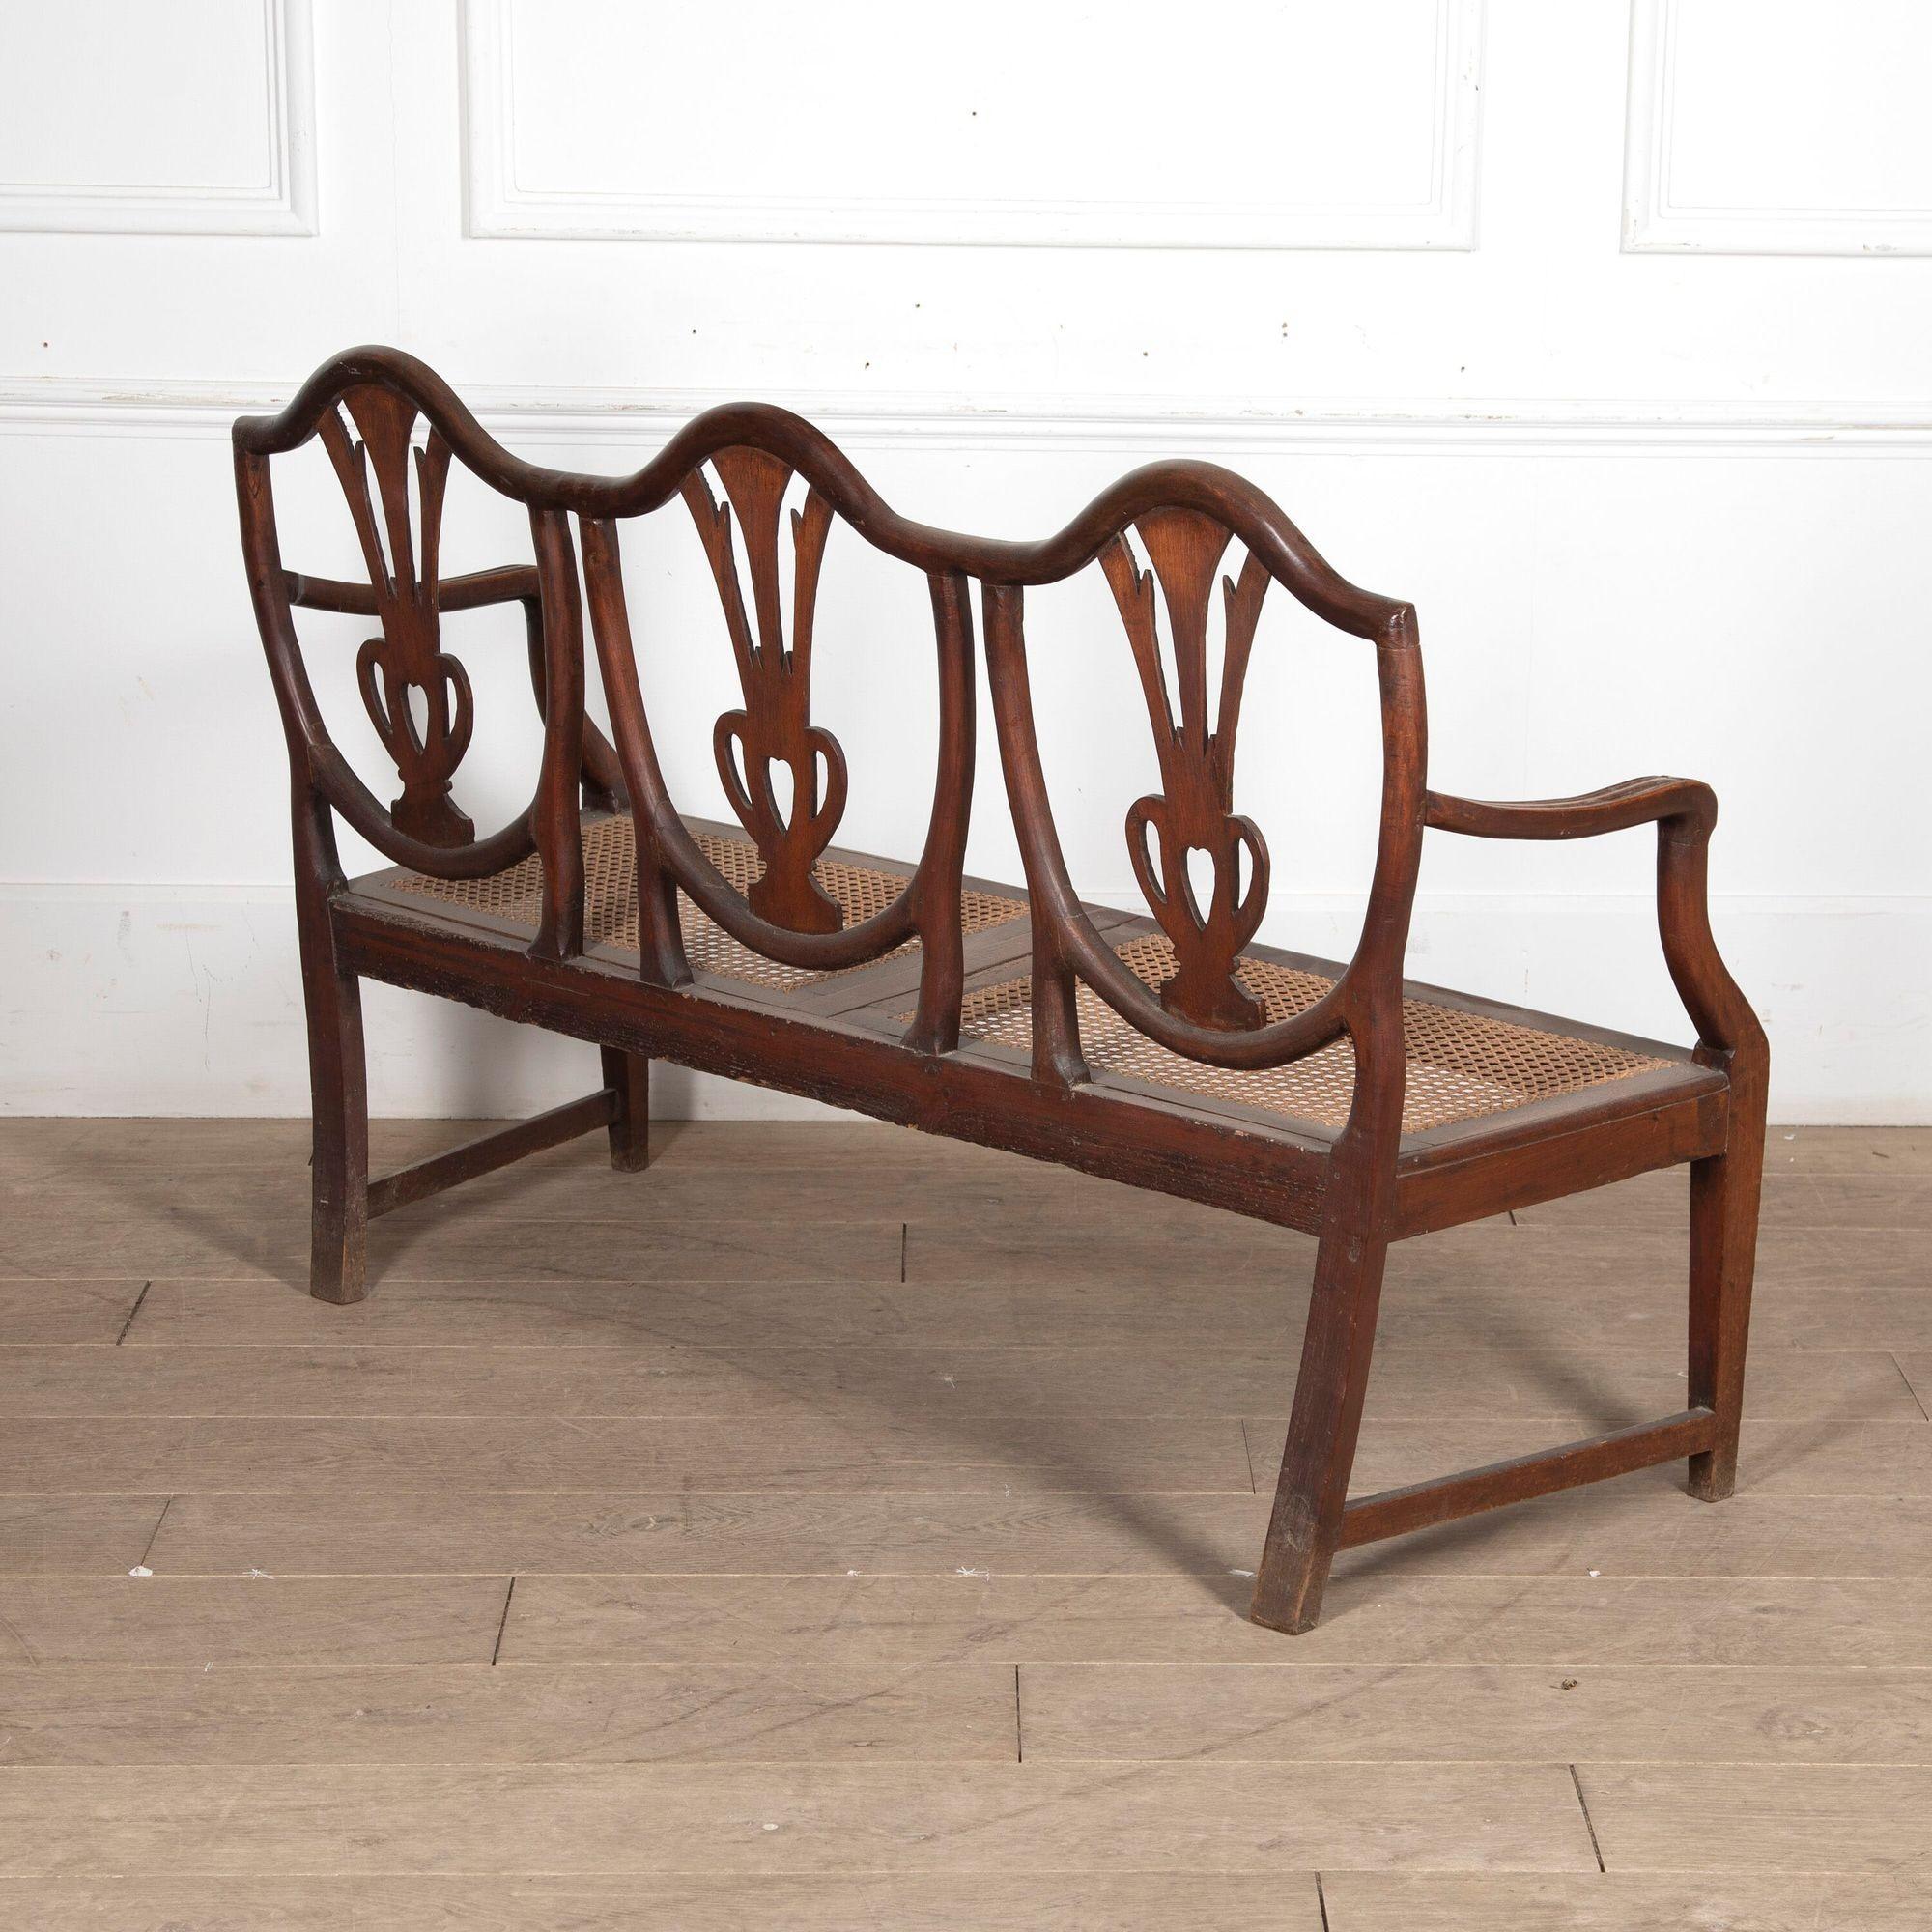 Small Georgian mahogany Hepplewhite settee.
Dating from the late 18th century, Circa 1780, this superb mahogany triple-shield back settee is of small proportions in the style of George Hepplewhite.
The carved shield backs with corn sprouting from